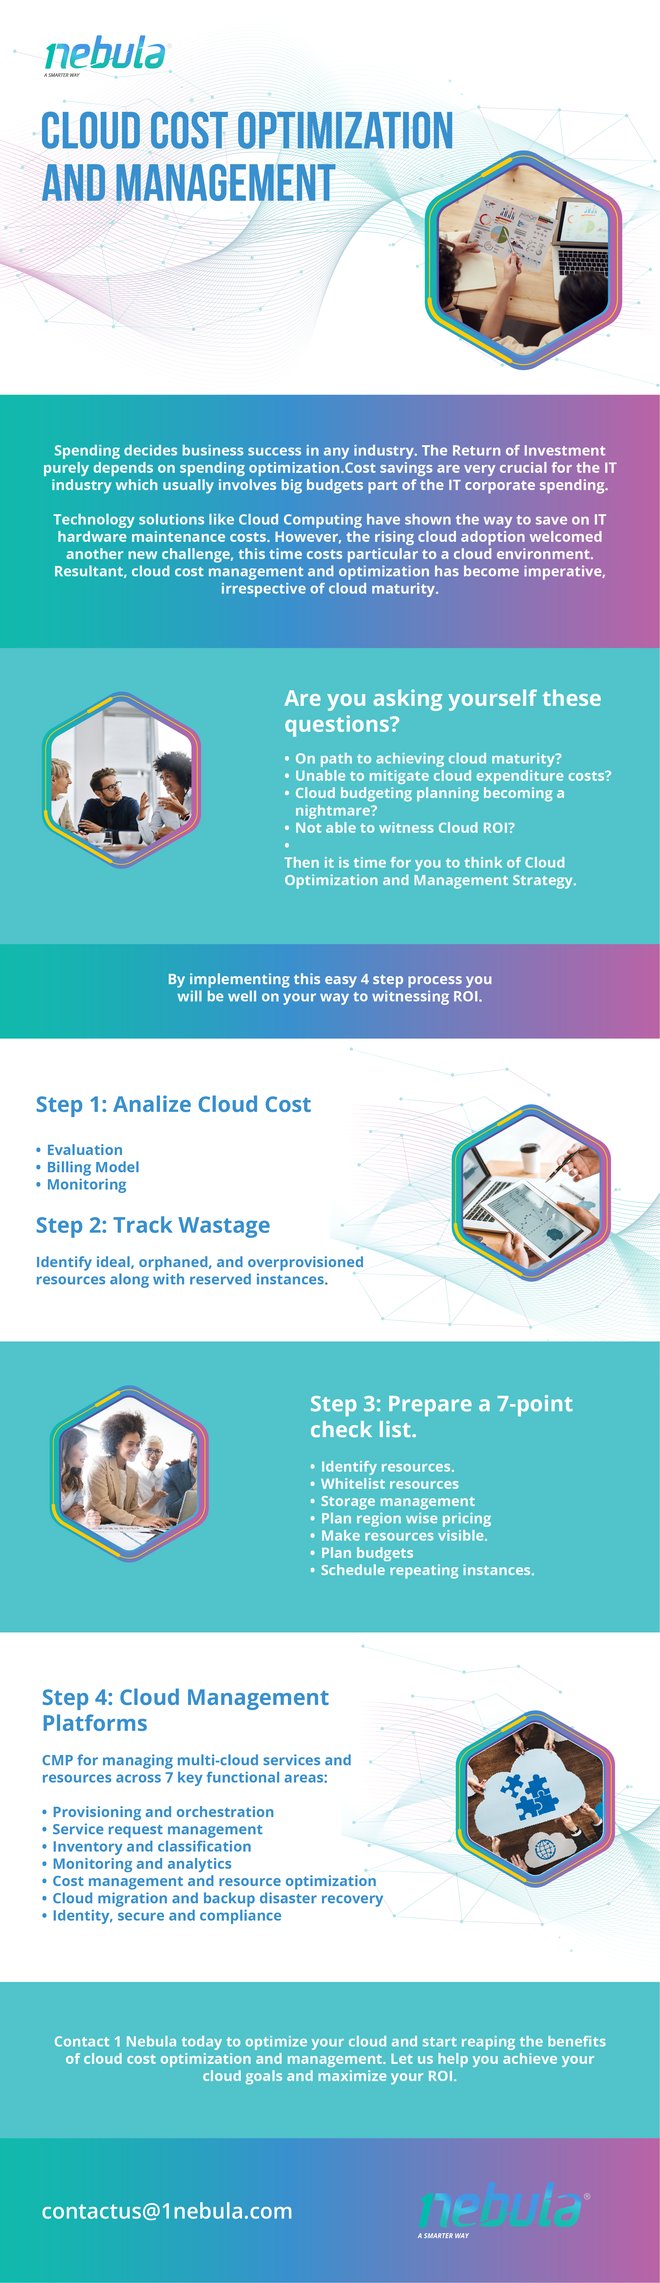 Cloud Cost Optimization infographic-01